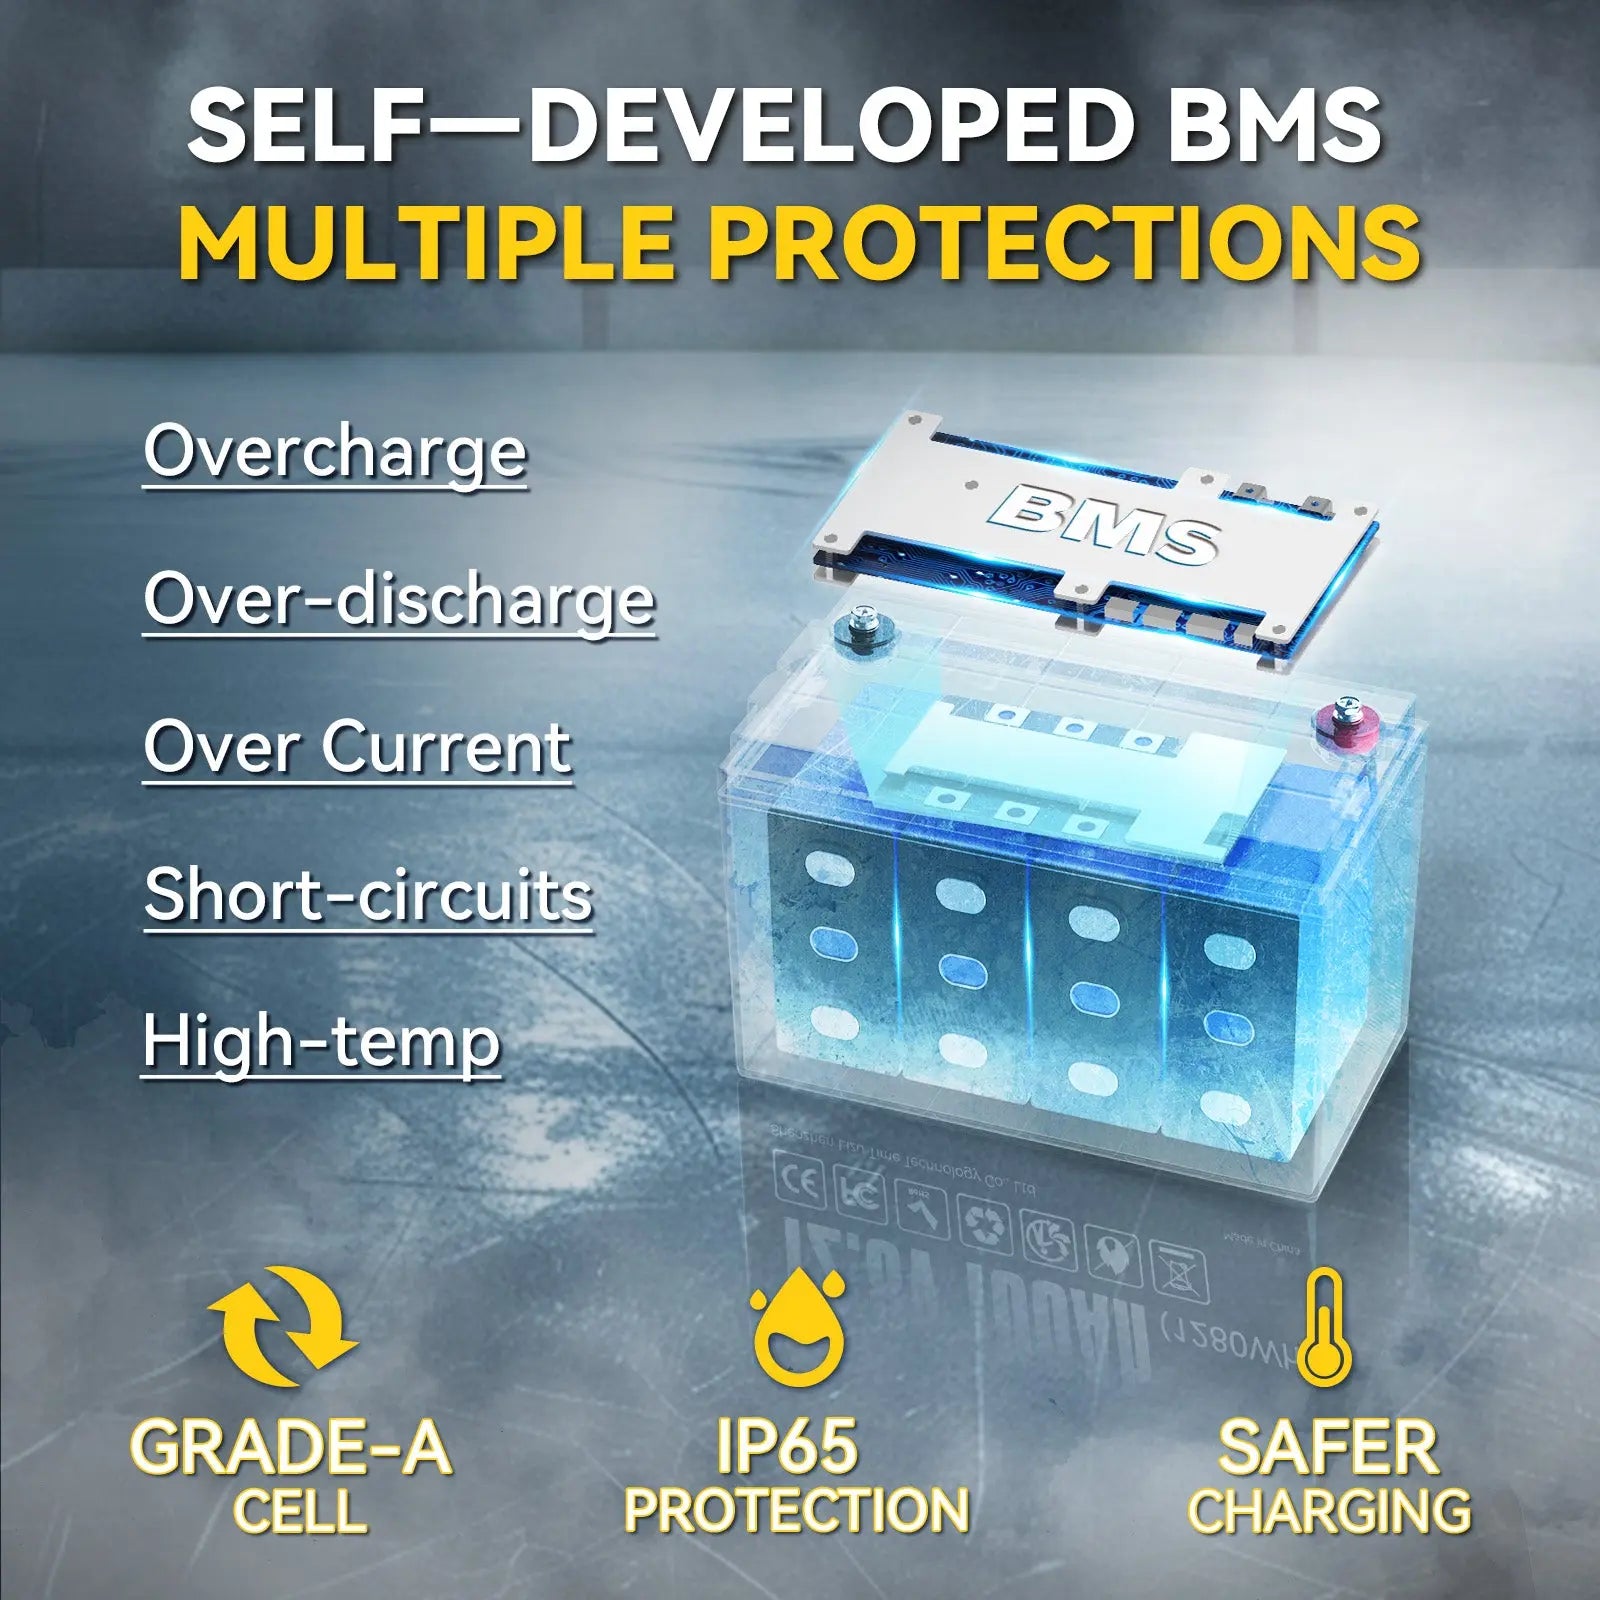 lithium battery self-developed BMS multiple protections with grade-A cell